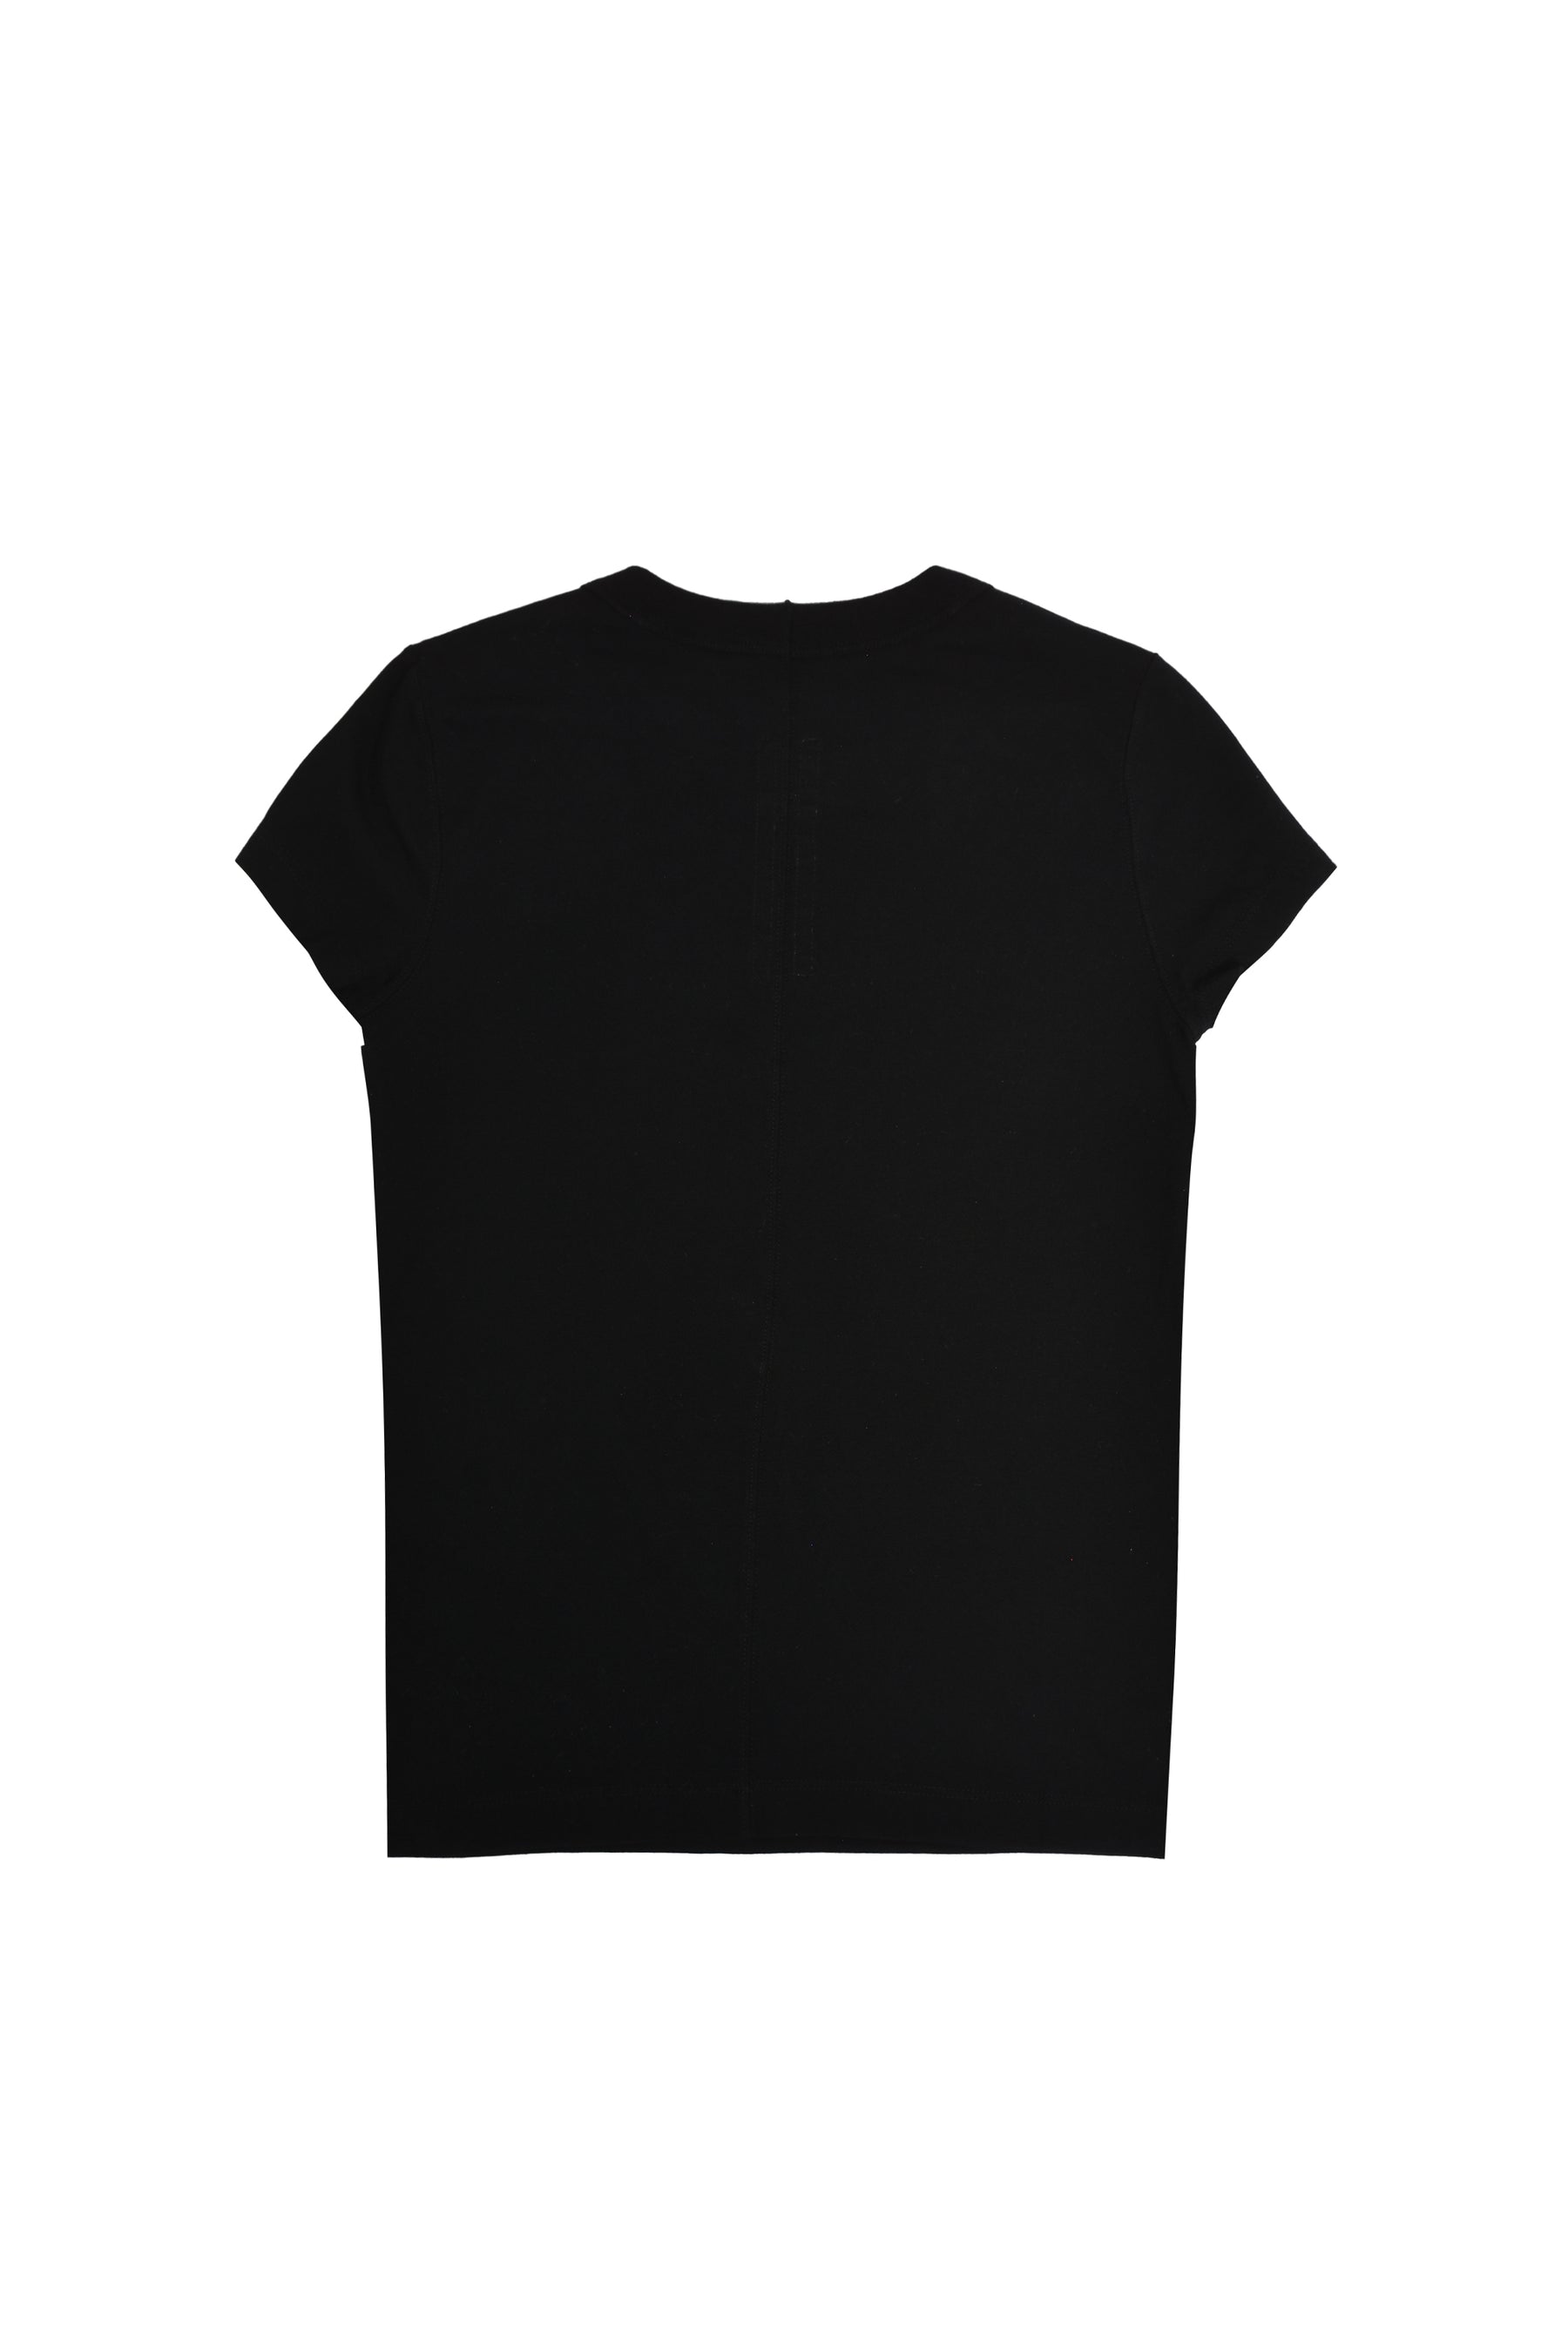 CROPPED LEVEL T / BLK